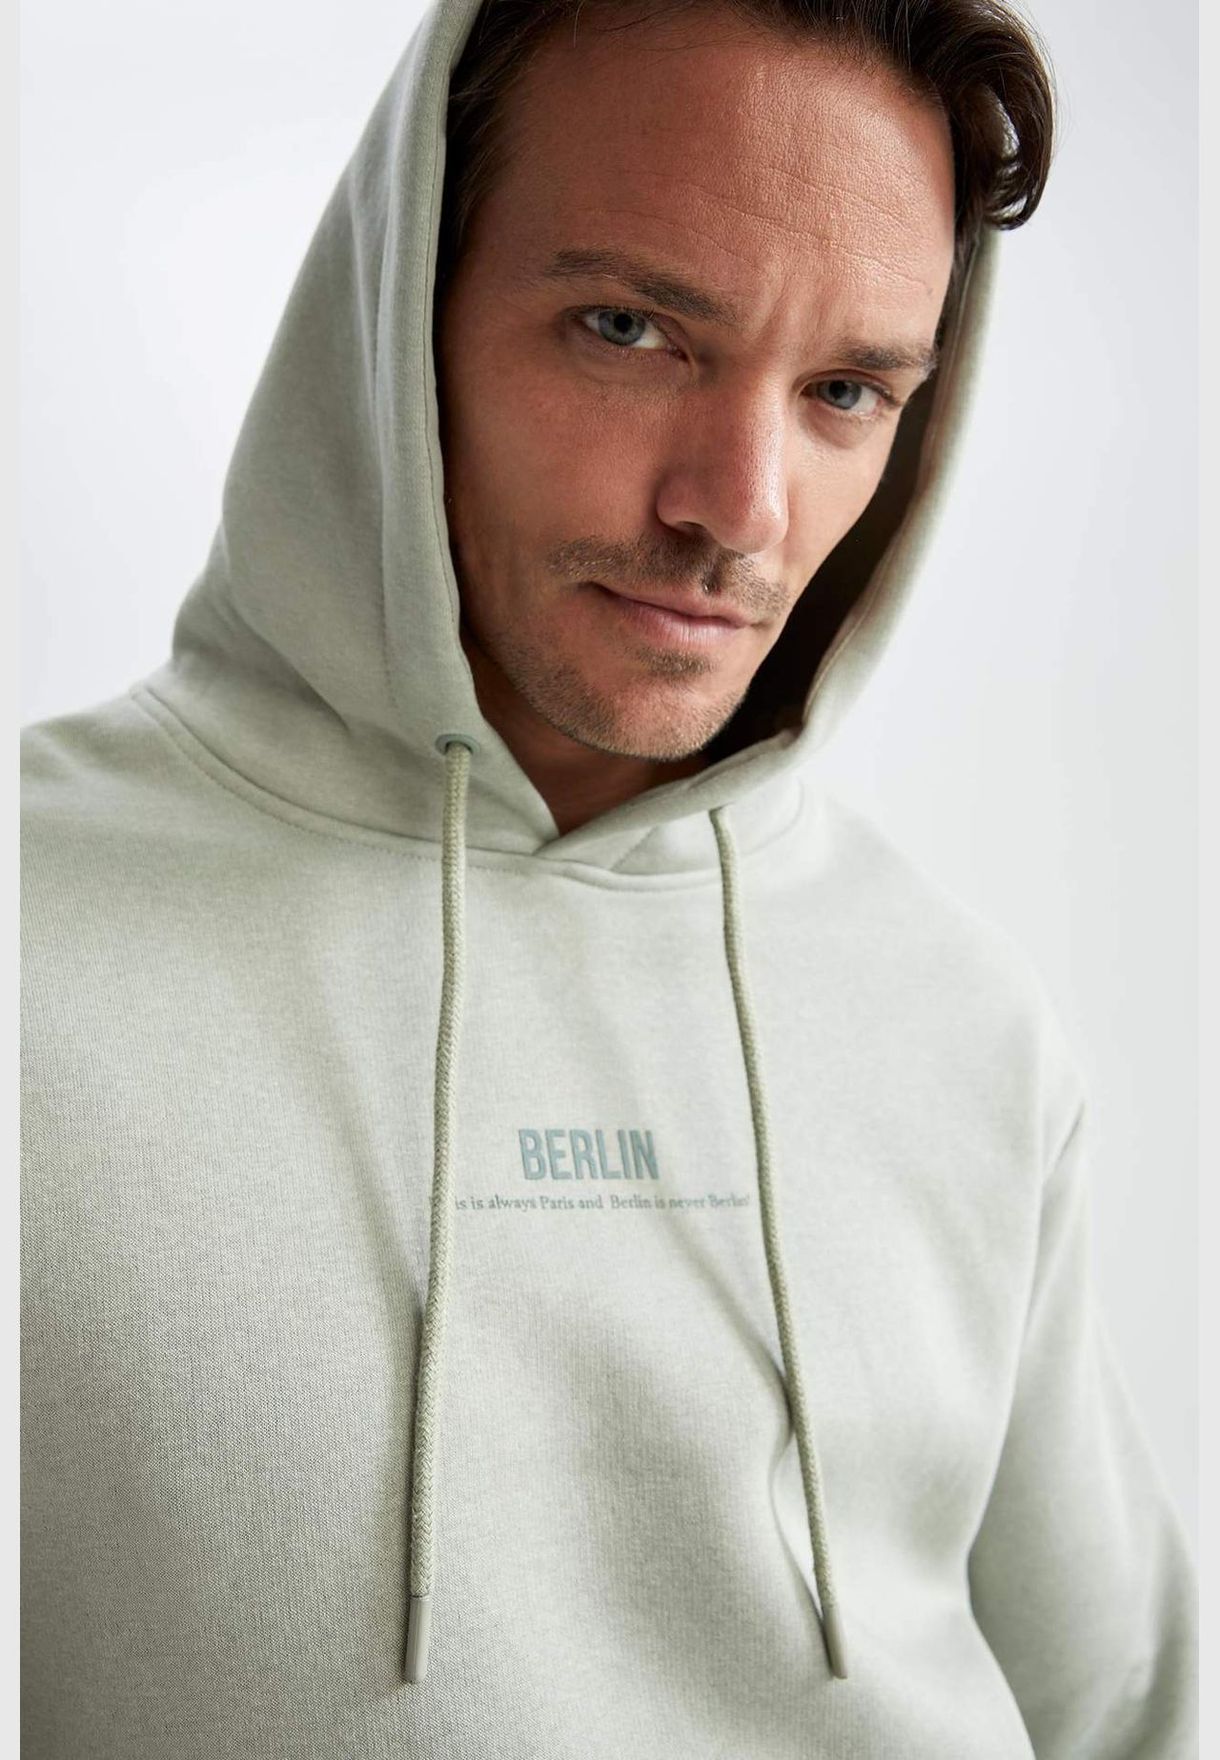 Man Relax Fit Hooded Long Sleeve Knitted Sweatshirt